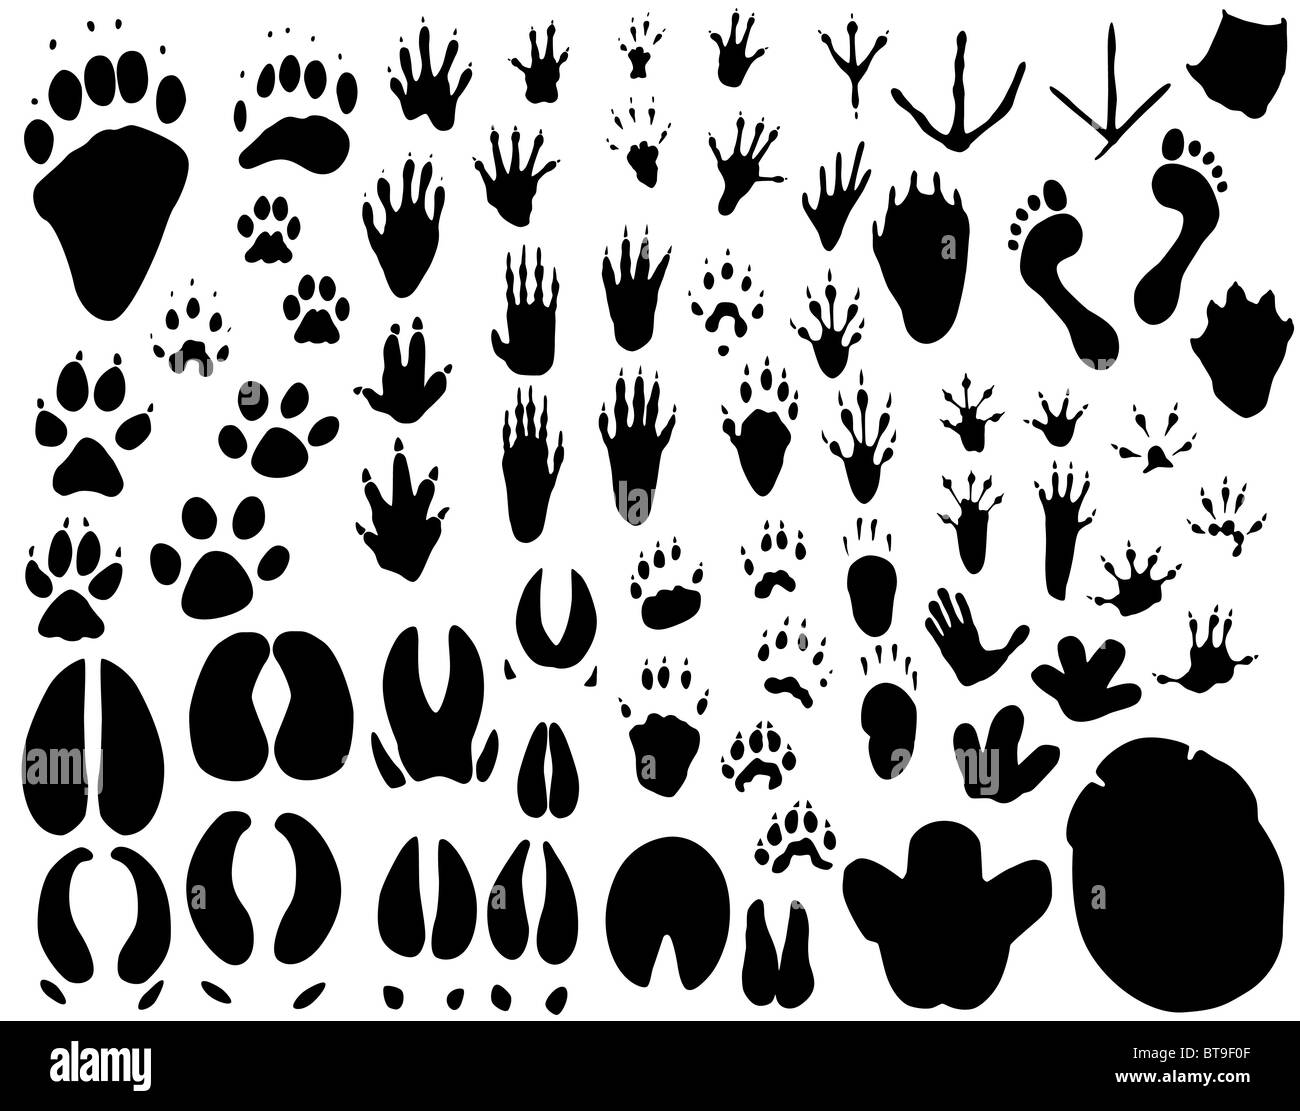 127,342 Animal Track Images, Stock Photos, 3D objects, & Vectors